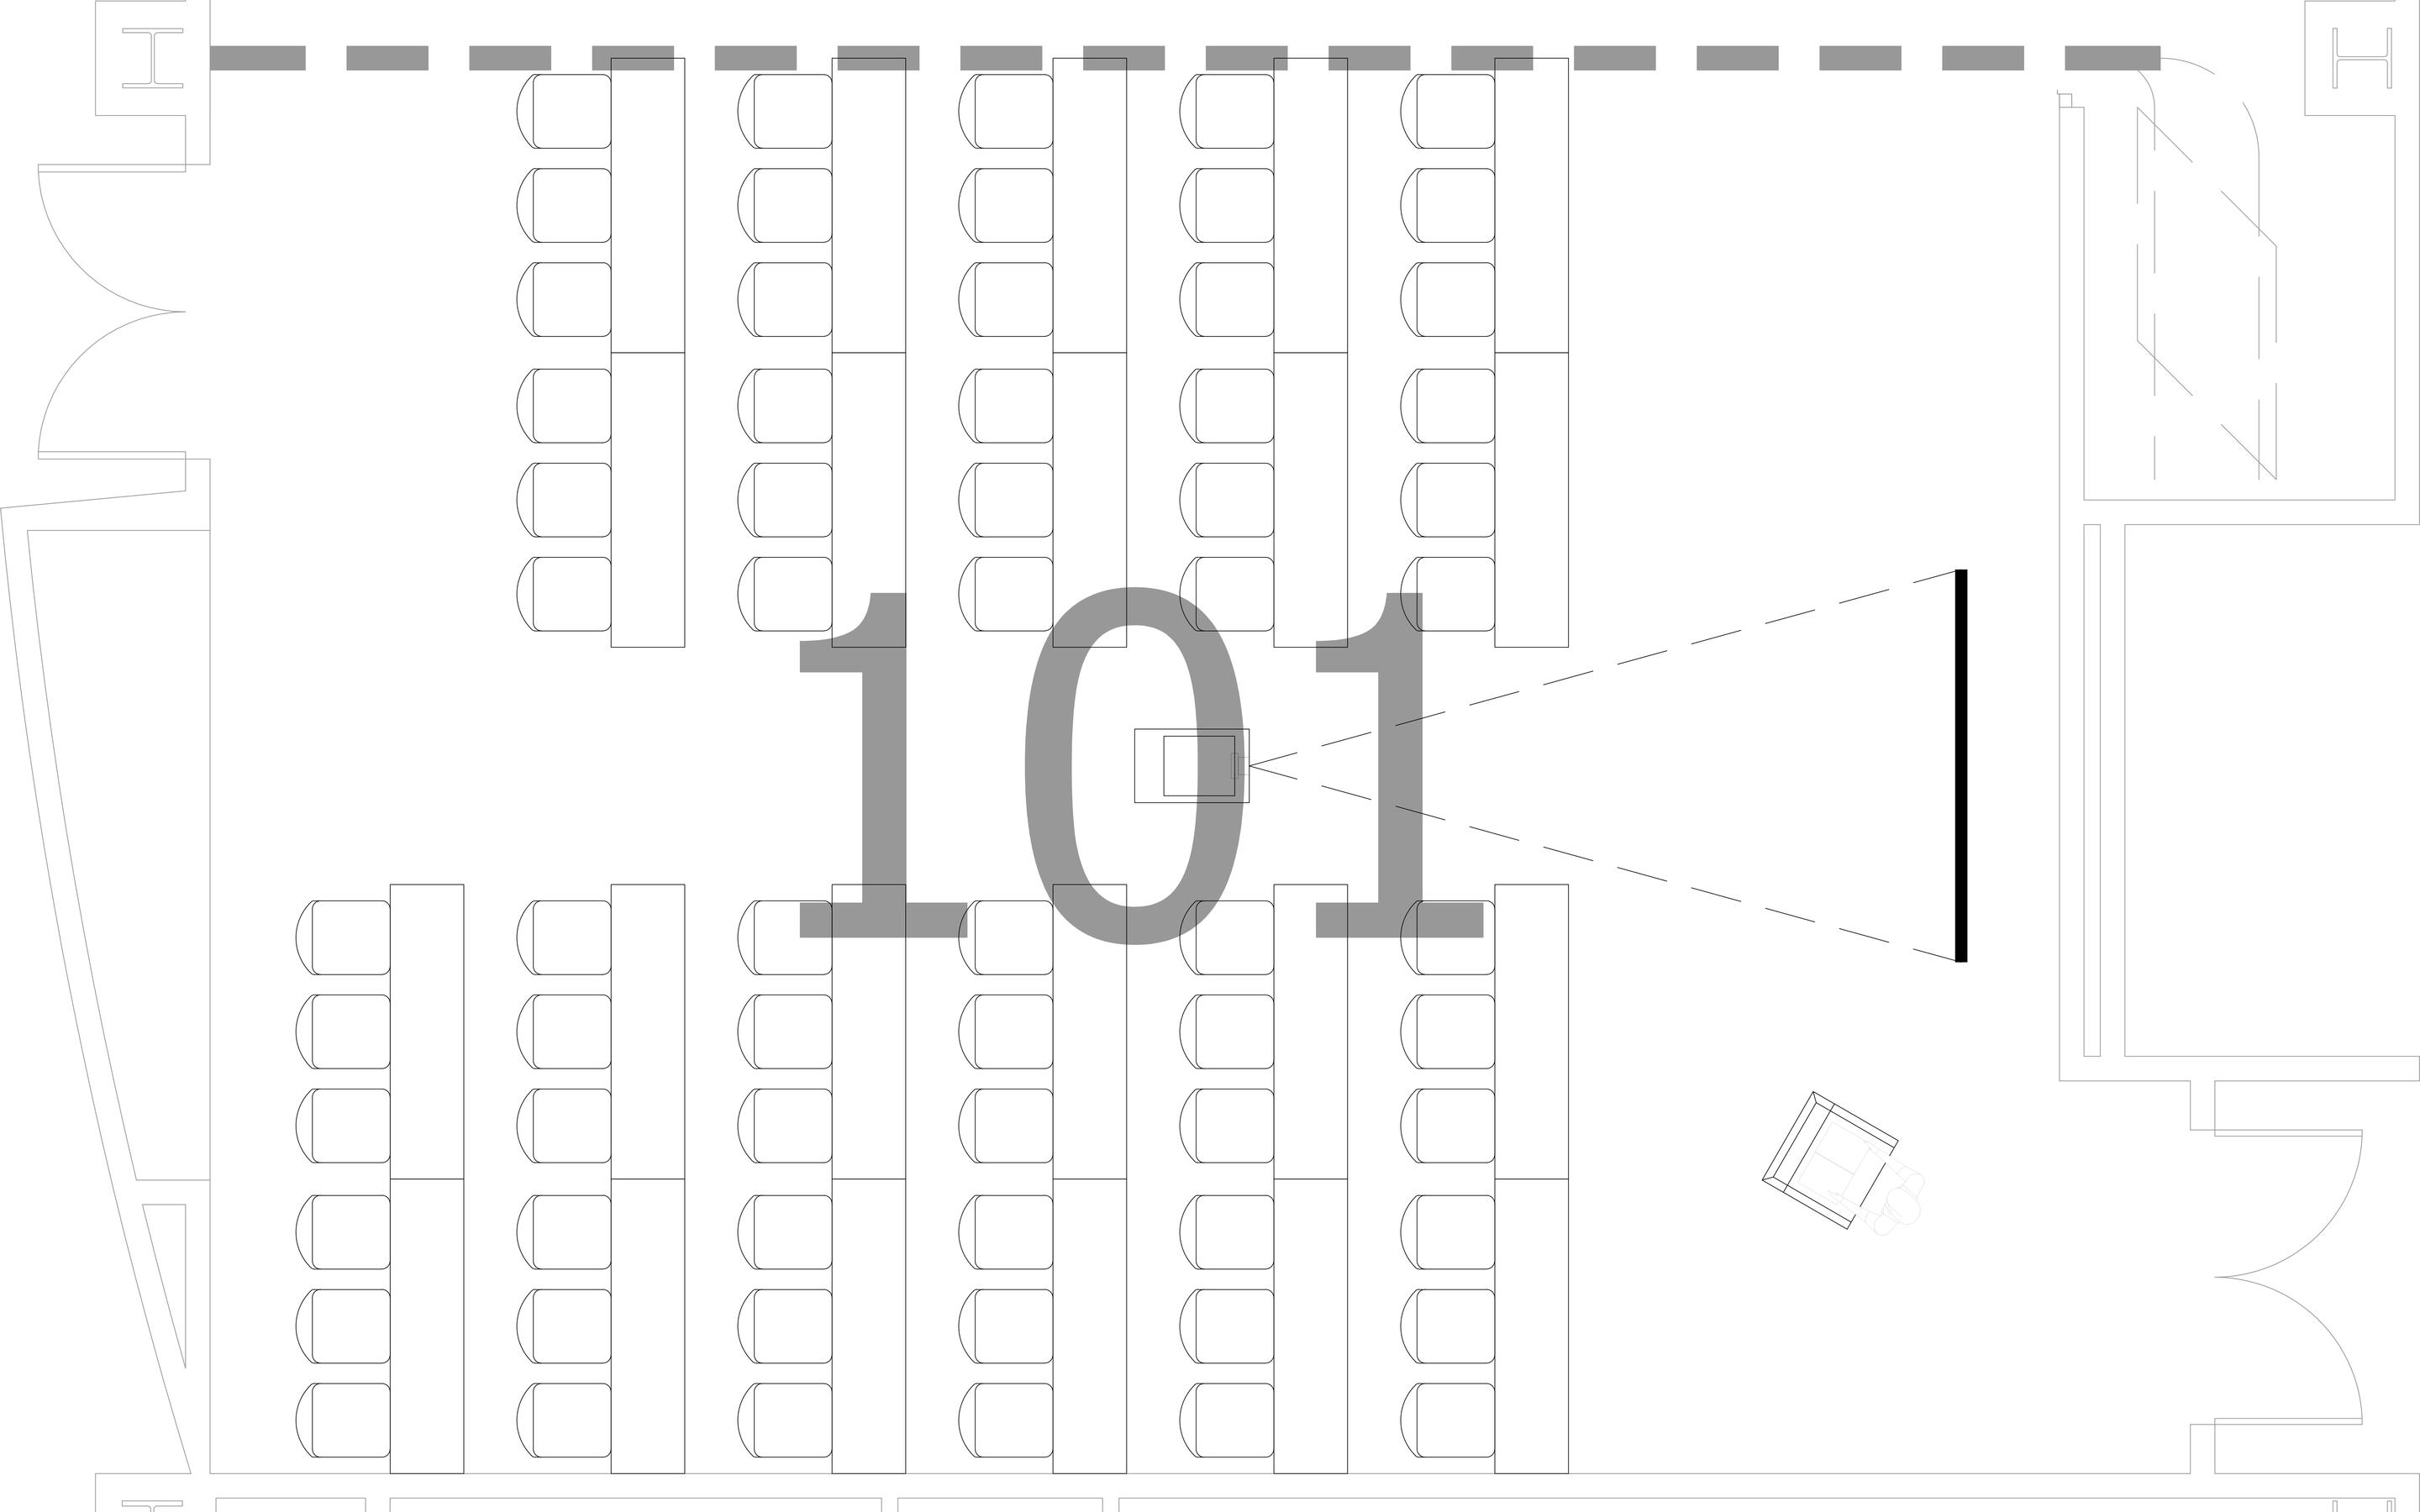 Mgm Grand Conference Center Seating Chart